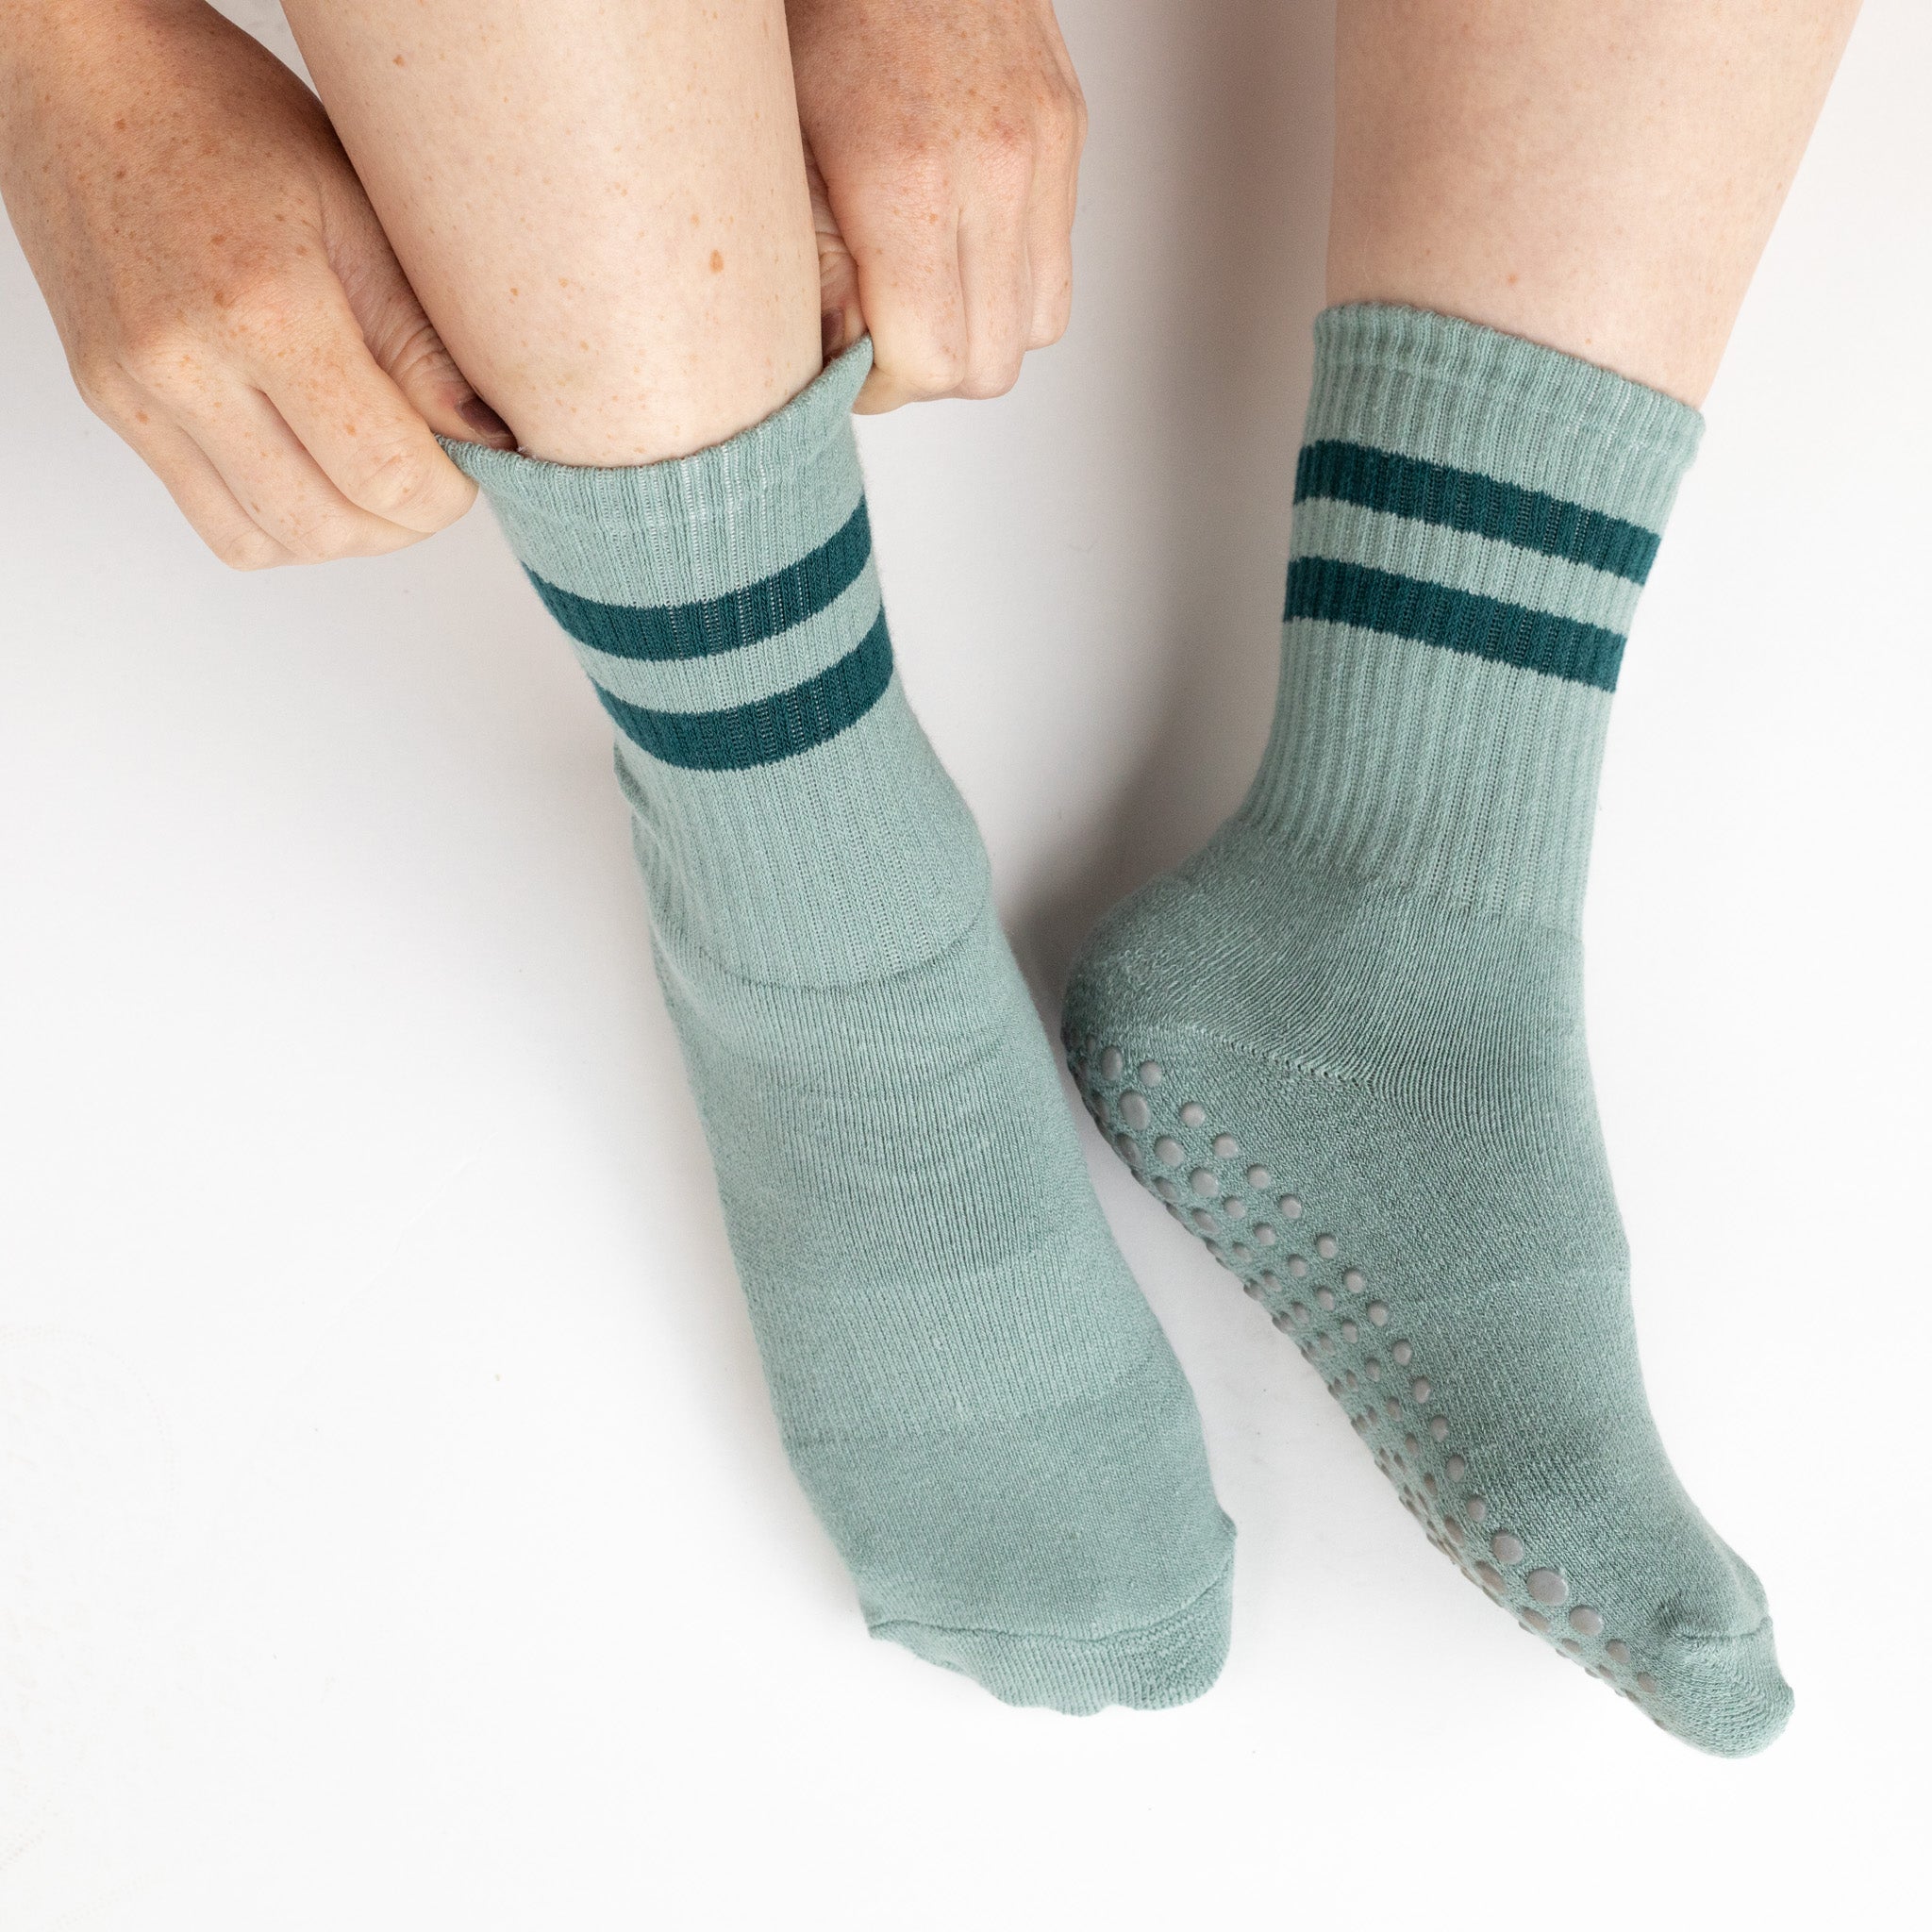 A woman wearing Blue & Teal Grippy Socks while sitting on a white background.